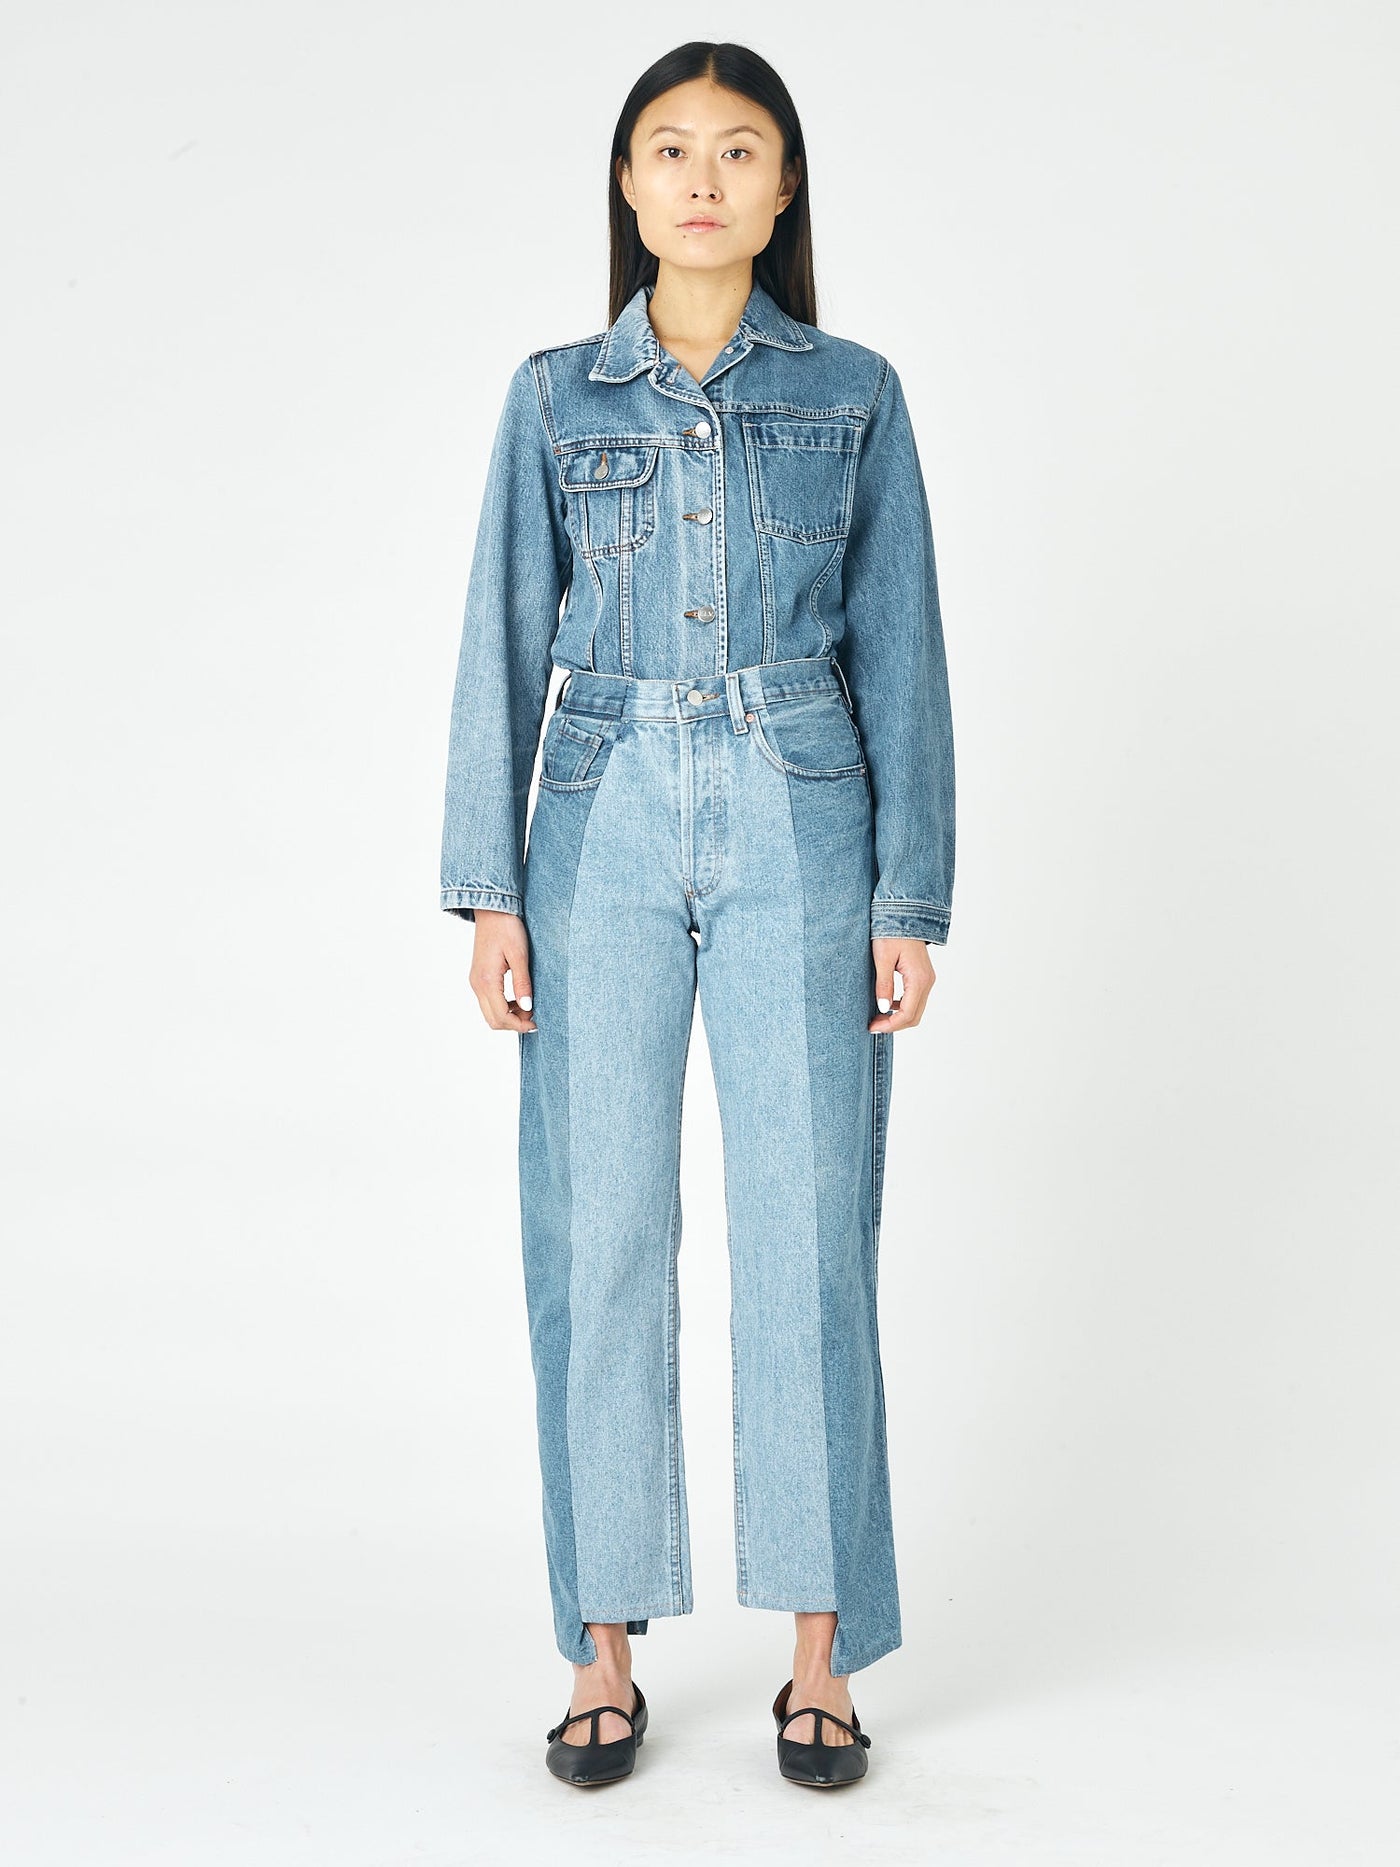 The Good American Denim Jumpsuit I Can't Live Without | Denim jumpsuit,  American denim, Cool outfits